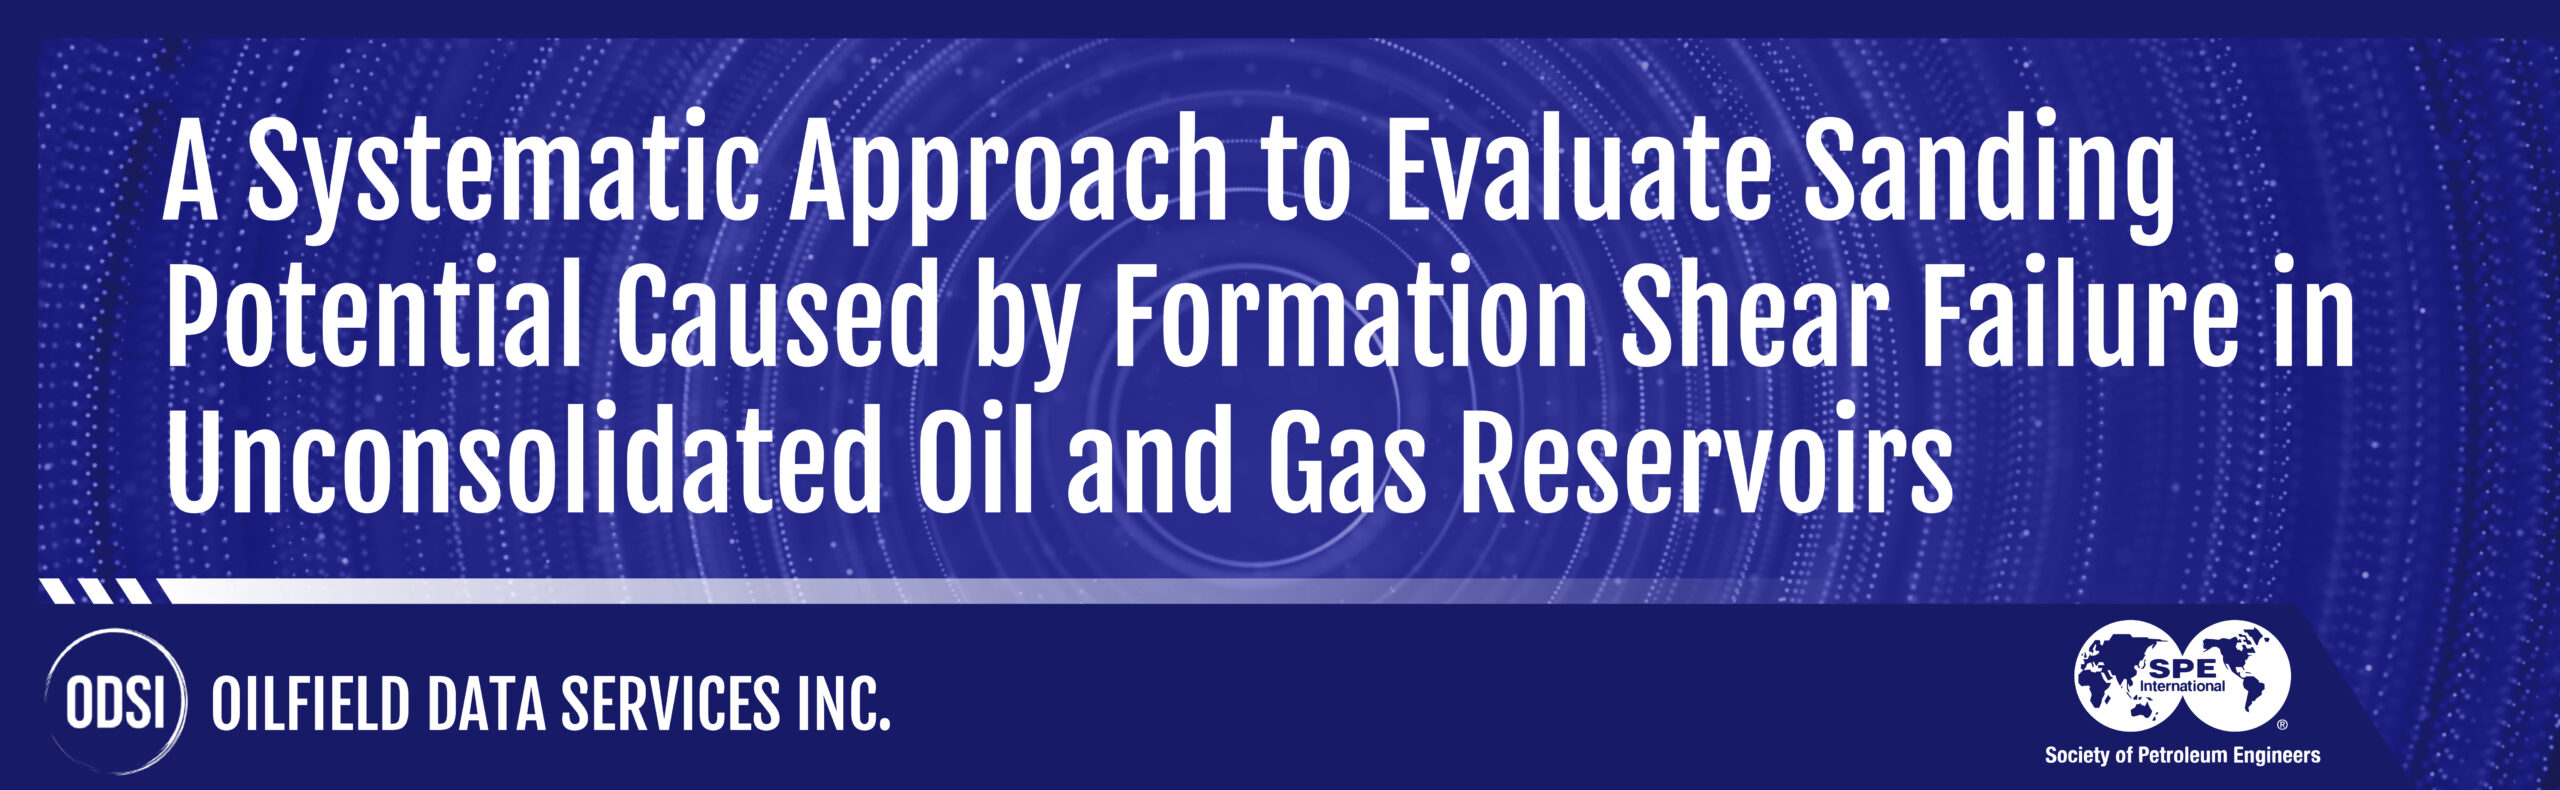 A Systematic Approach to Evaluate Sanding Potential Caused by Formation Shear Failure in Unconsolidated Oil and Gas Reservoirs